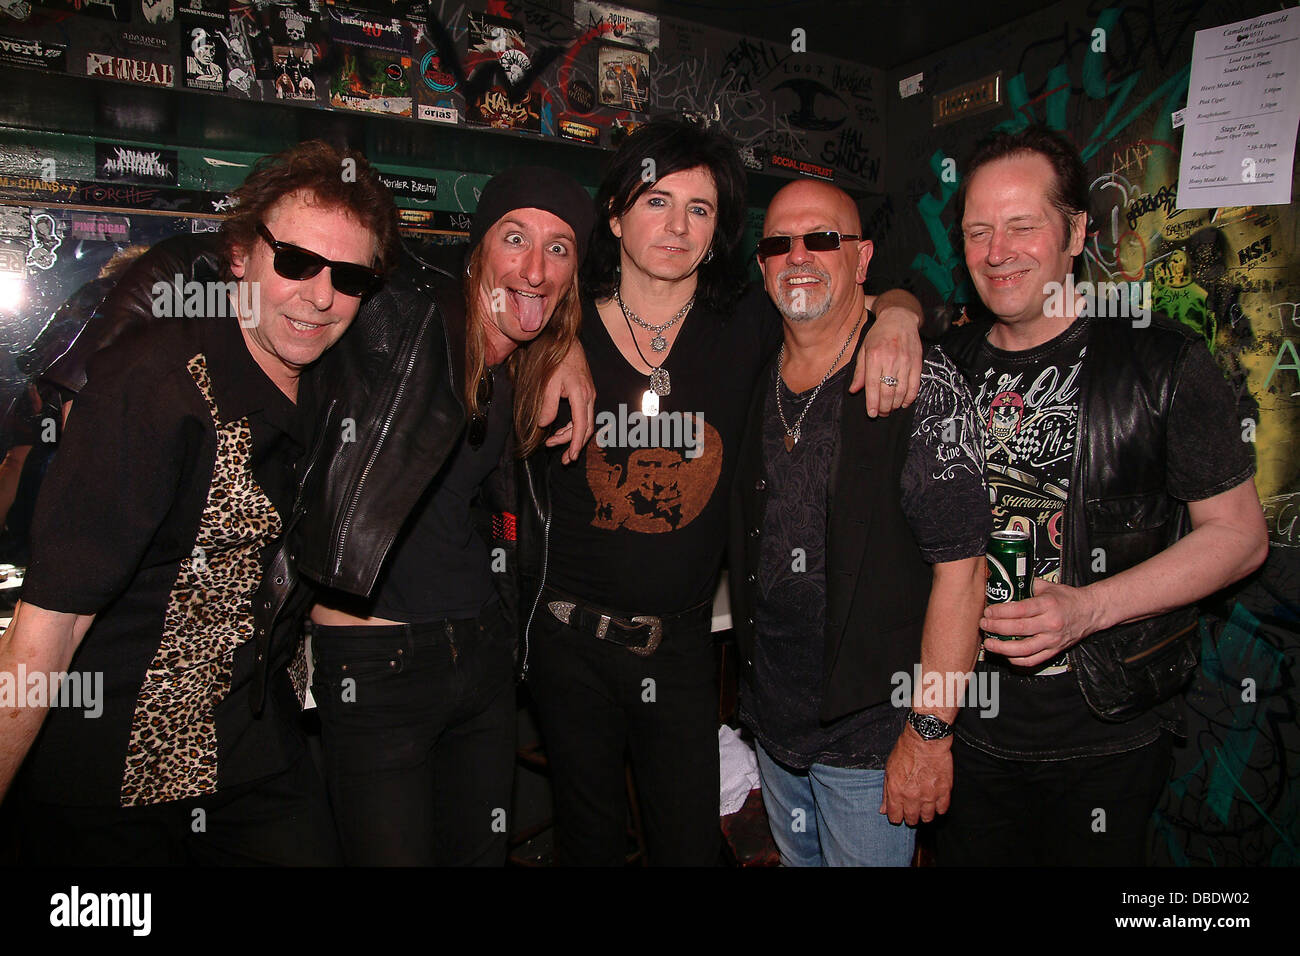 UK rock band Heavy Metal Kids featuring LA Guns frontman Phil Lewis  backstage after gig at the Camden Underworld. London England - 29.05.11  Stock Photo - Alamy